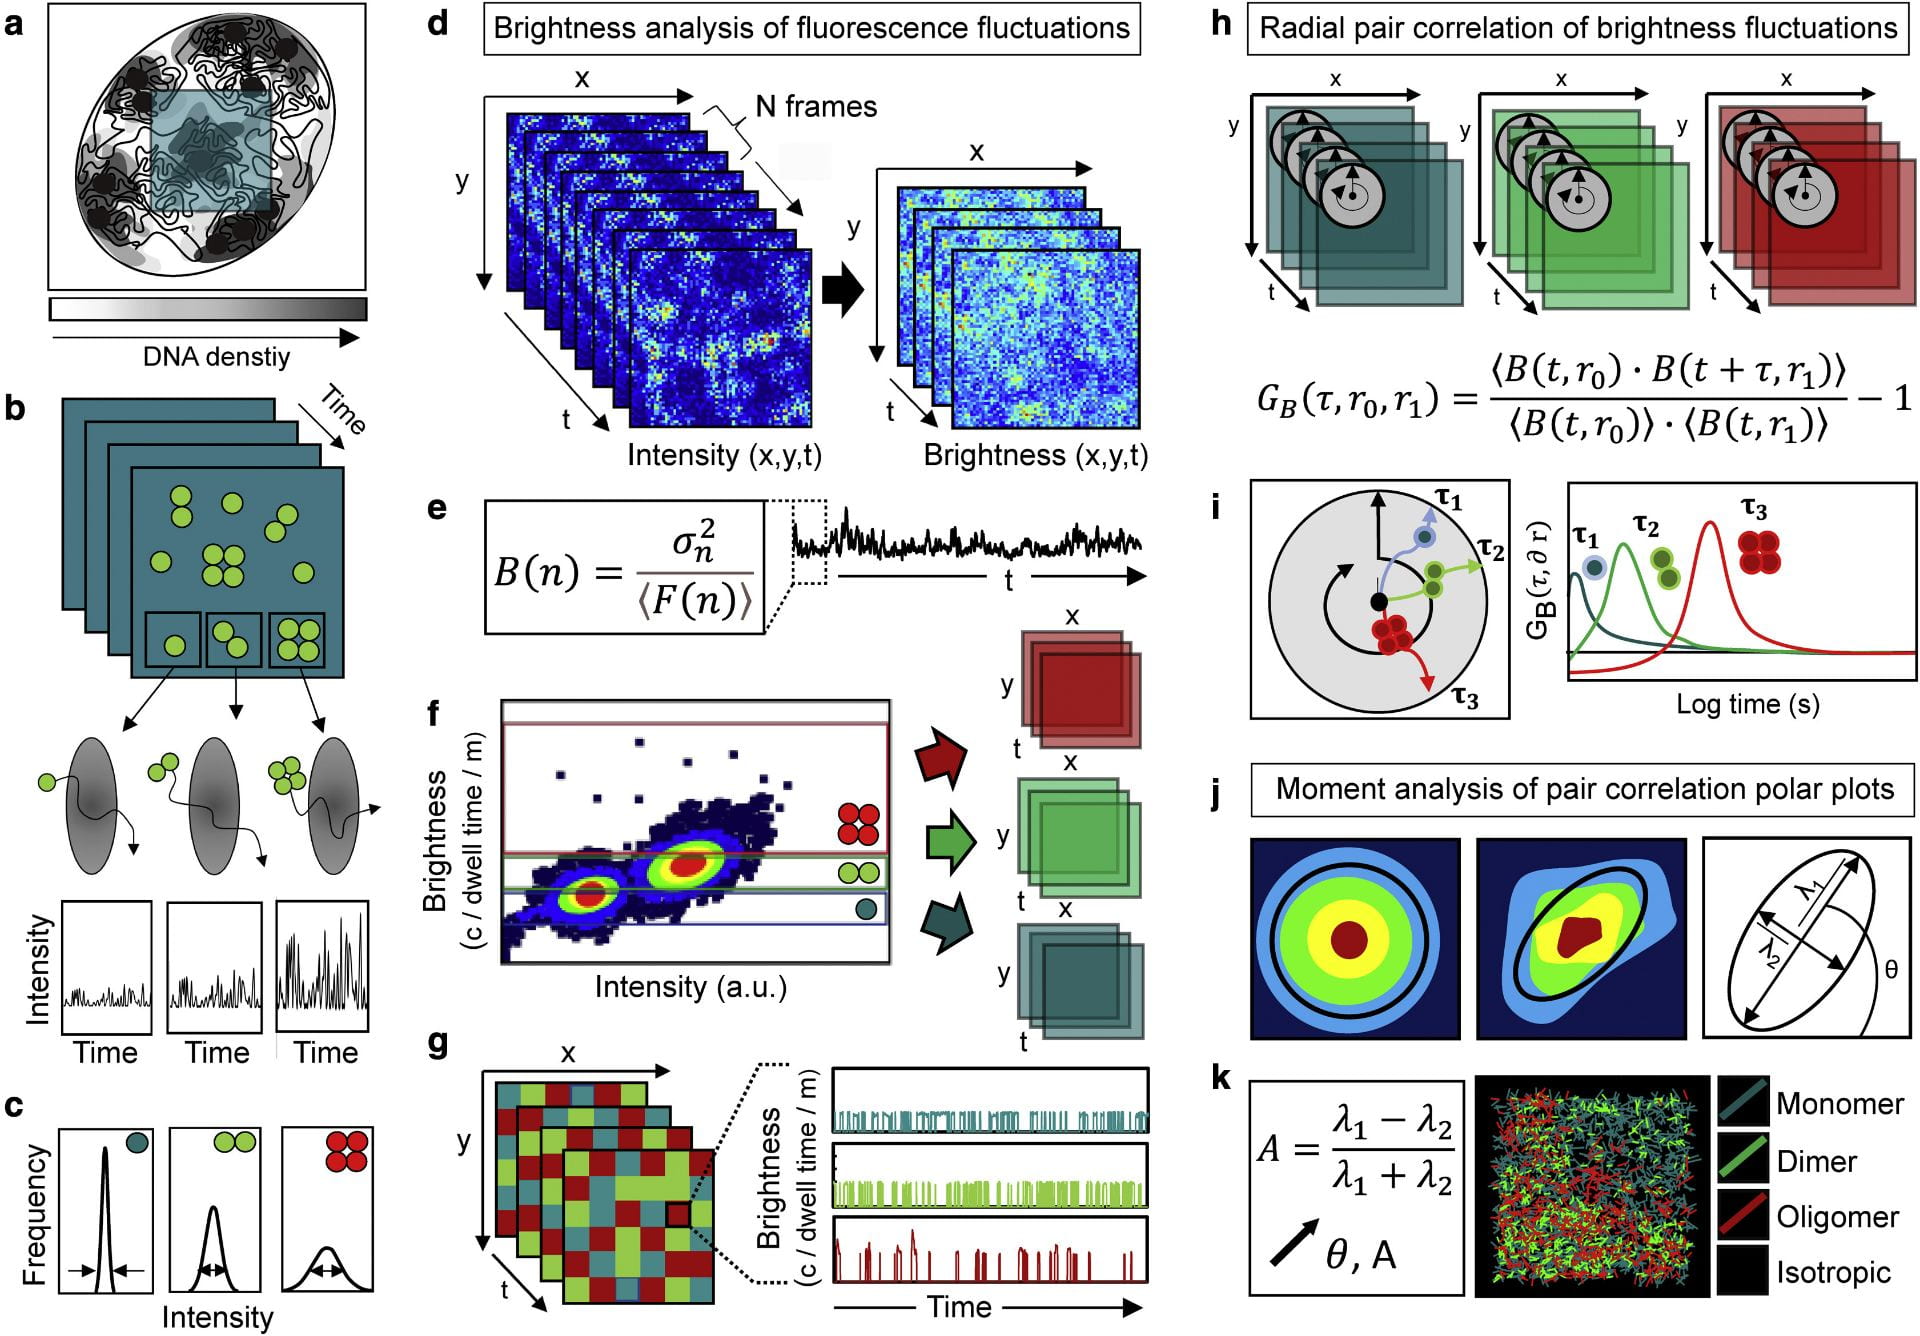 Radial pair correlation of molecular brightness fluctuations maps protein diffusion as a function of oligomeric state within live-cell nuclear architecture